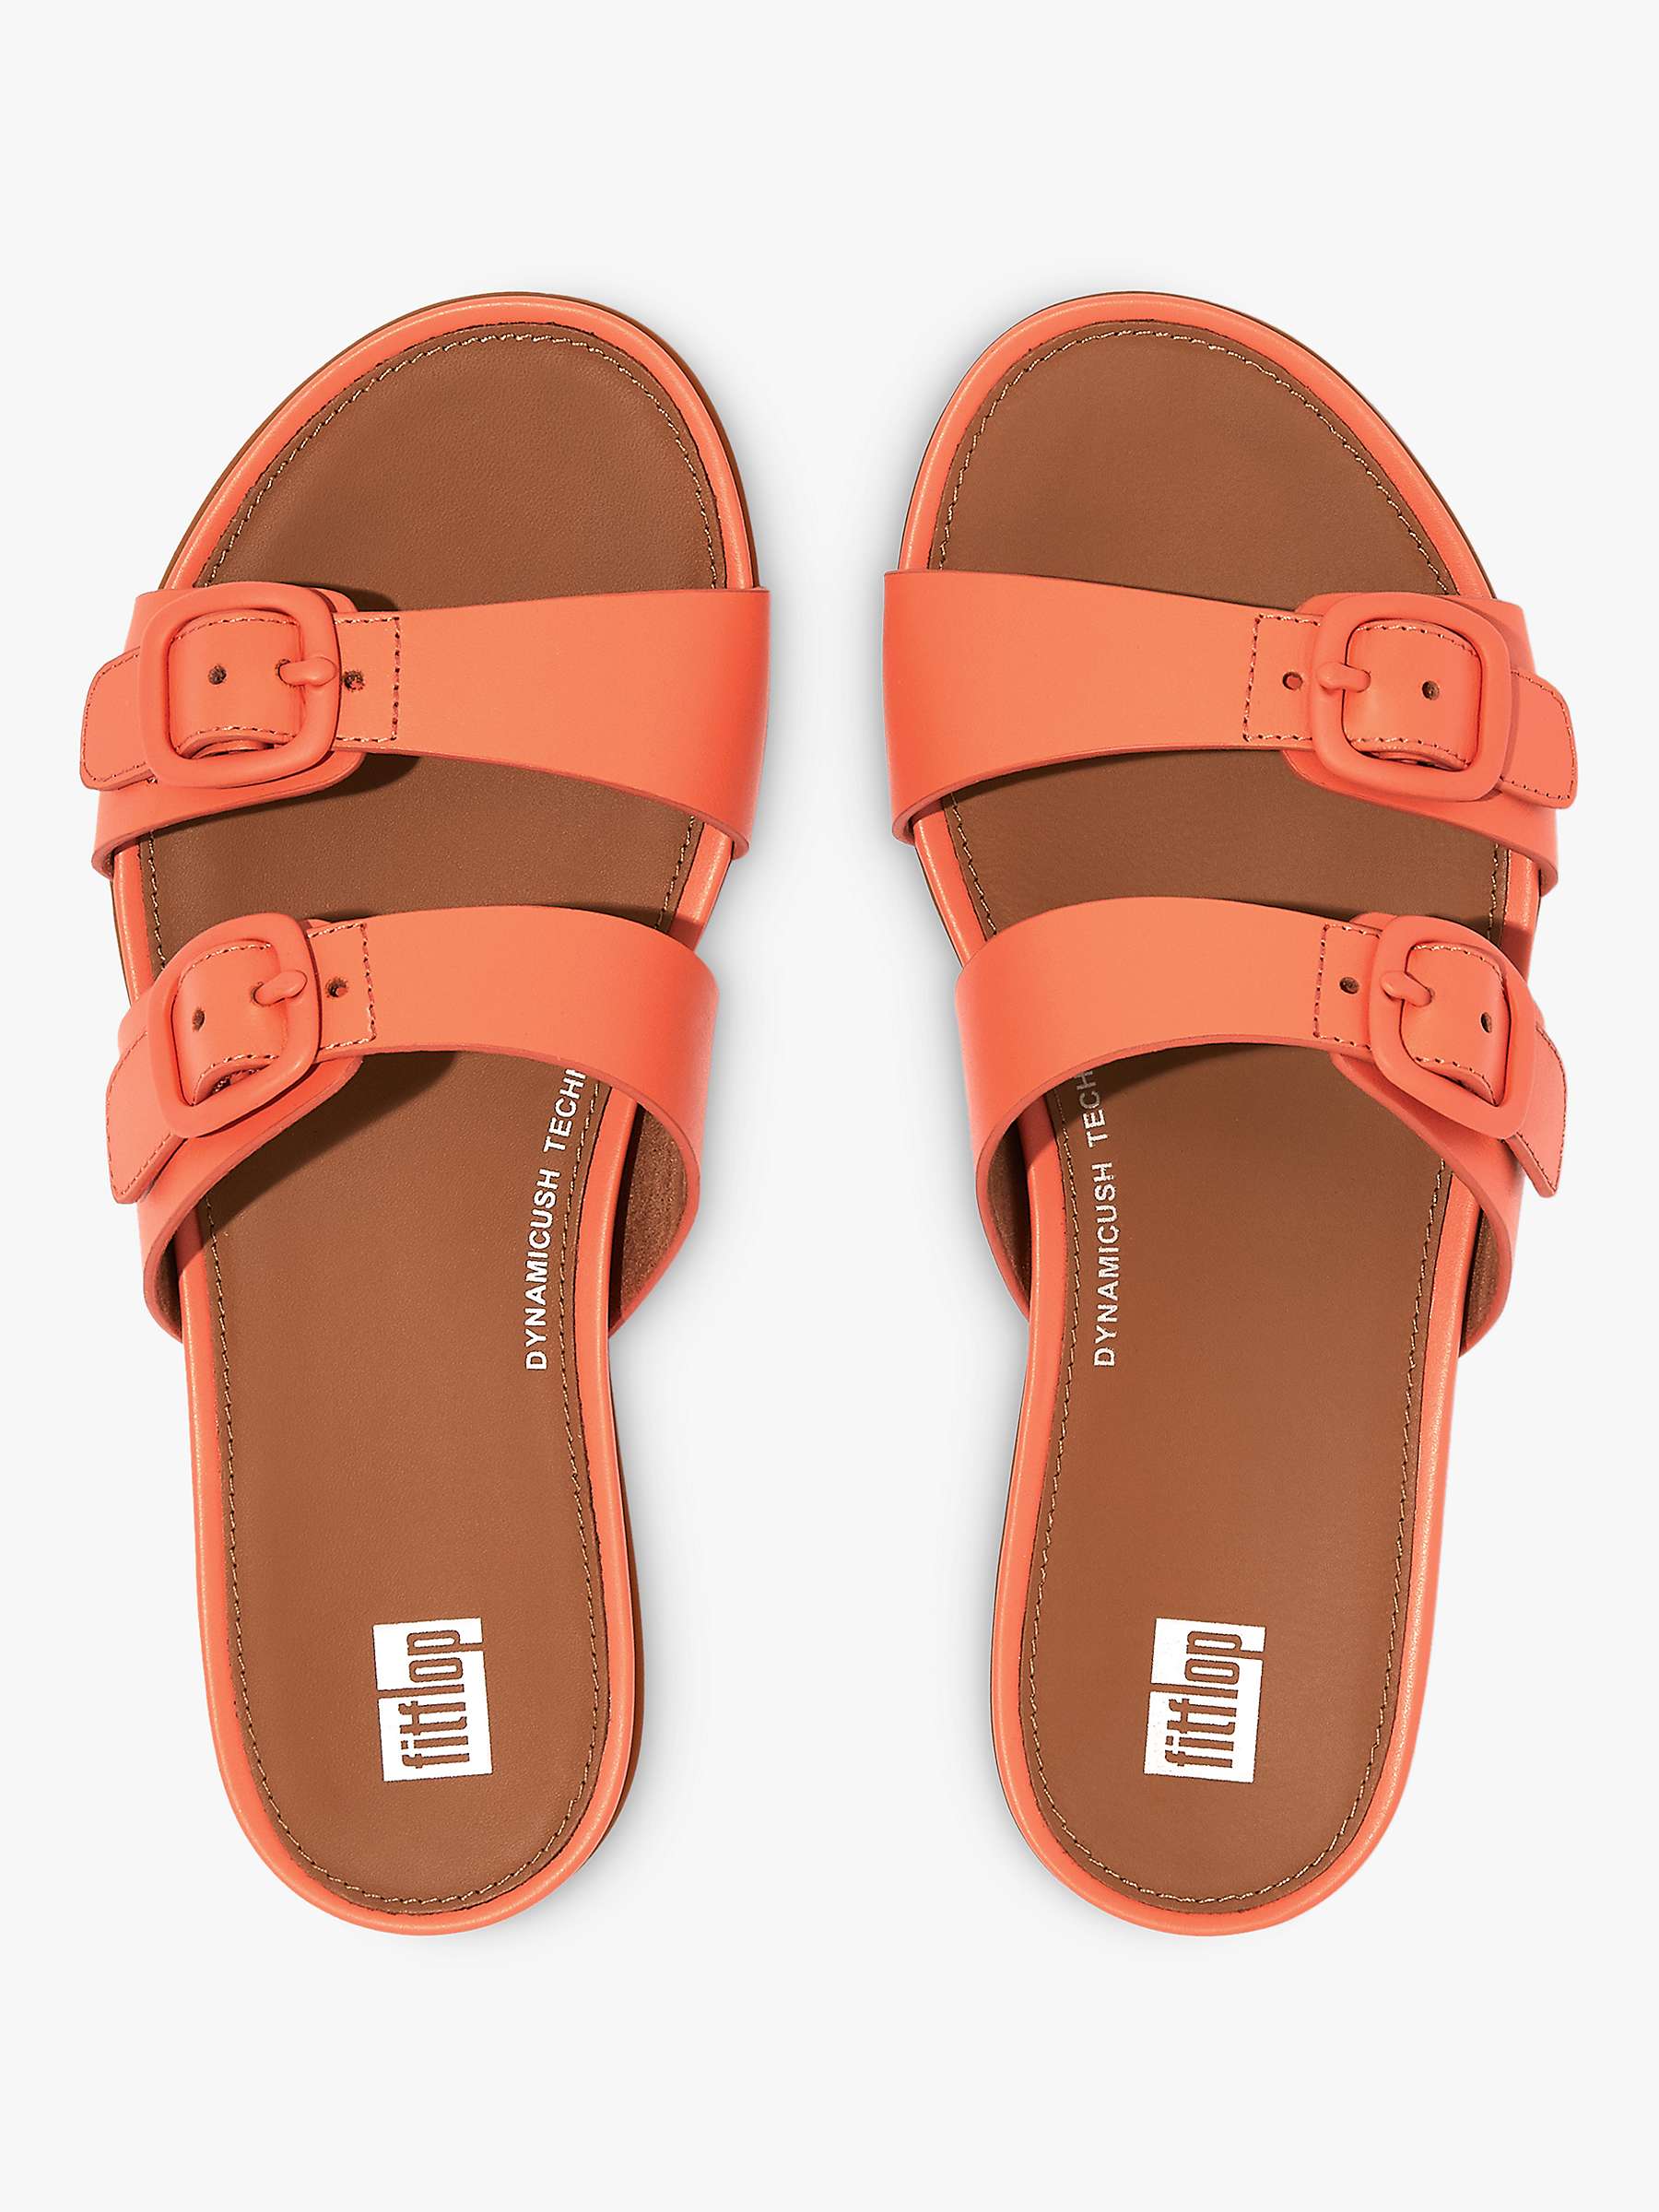 Buy FitFlop Gracie Leather Two Strap Sandals Online at johnlewis.com